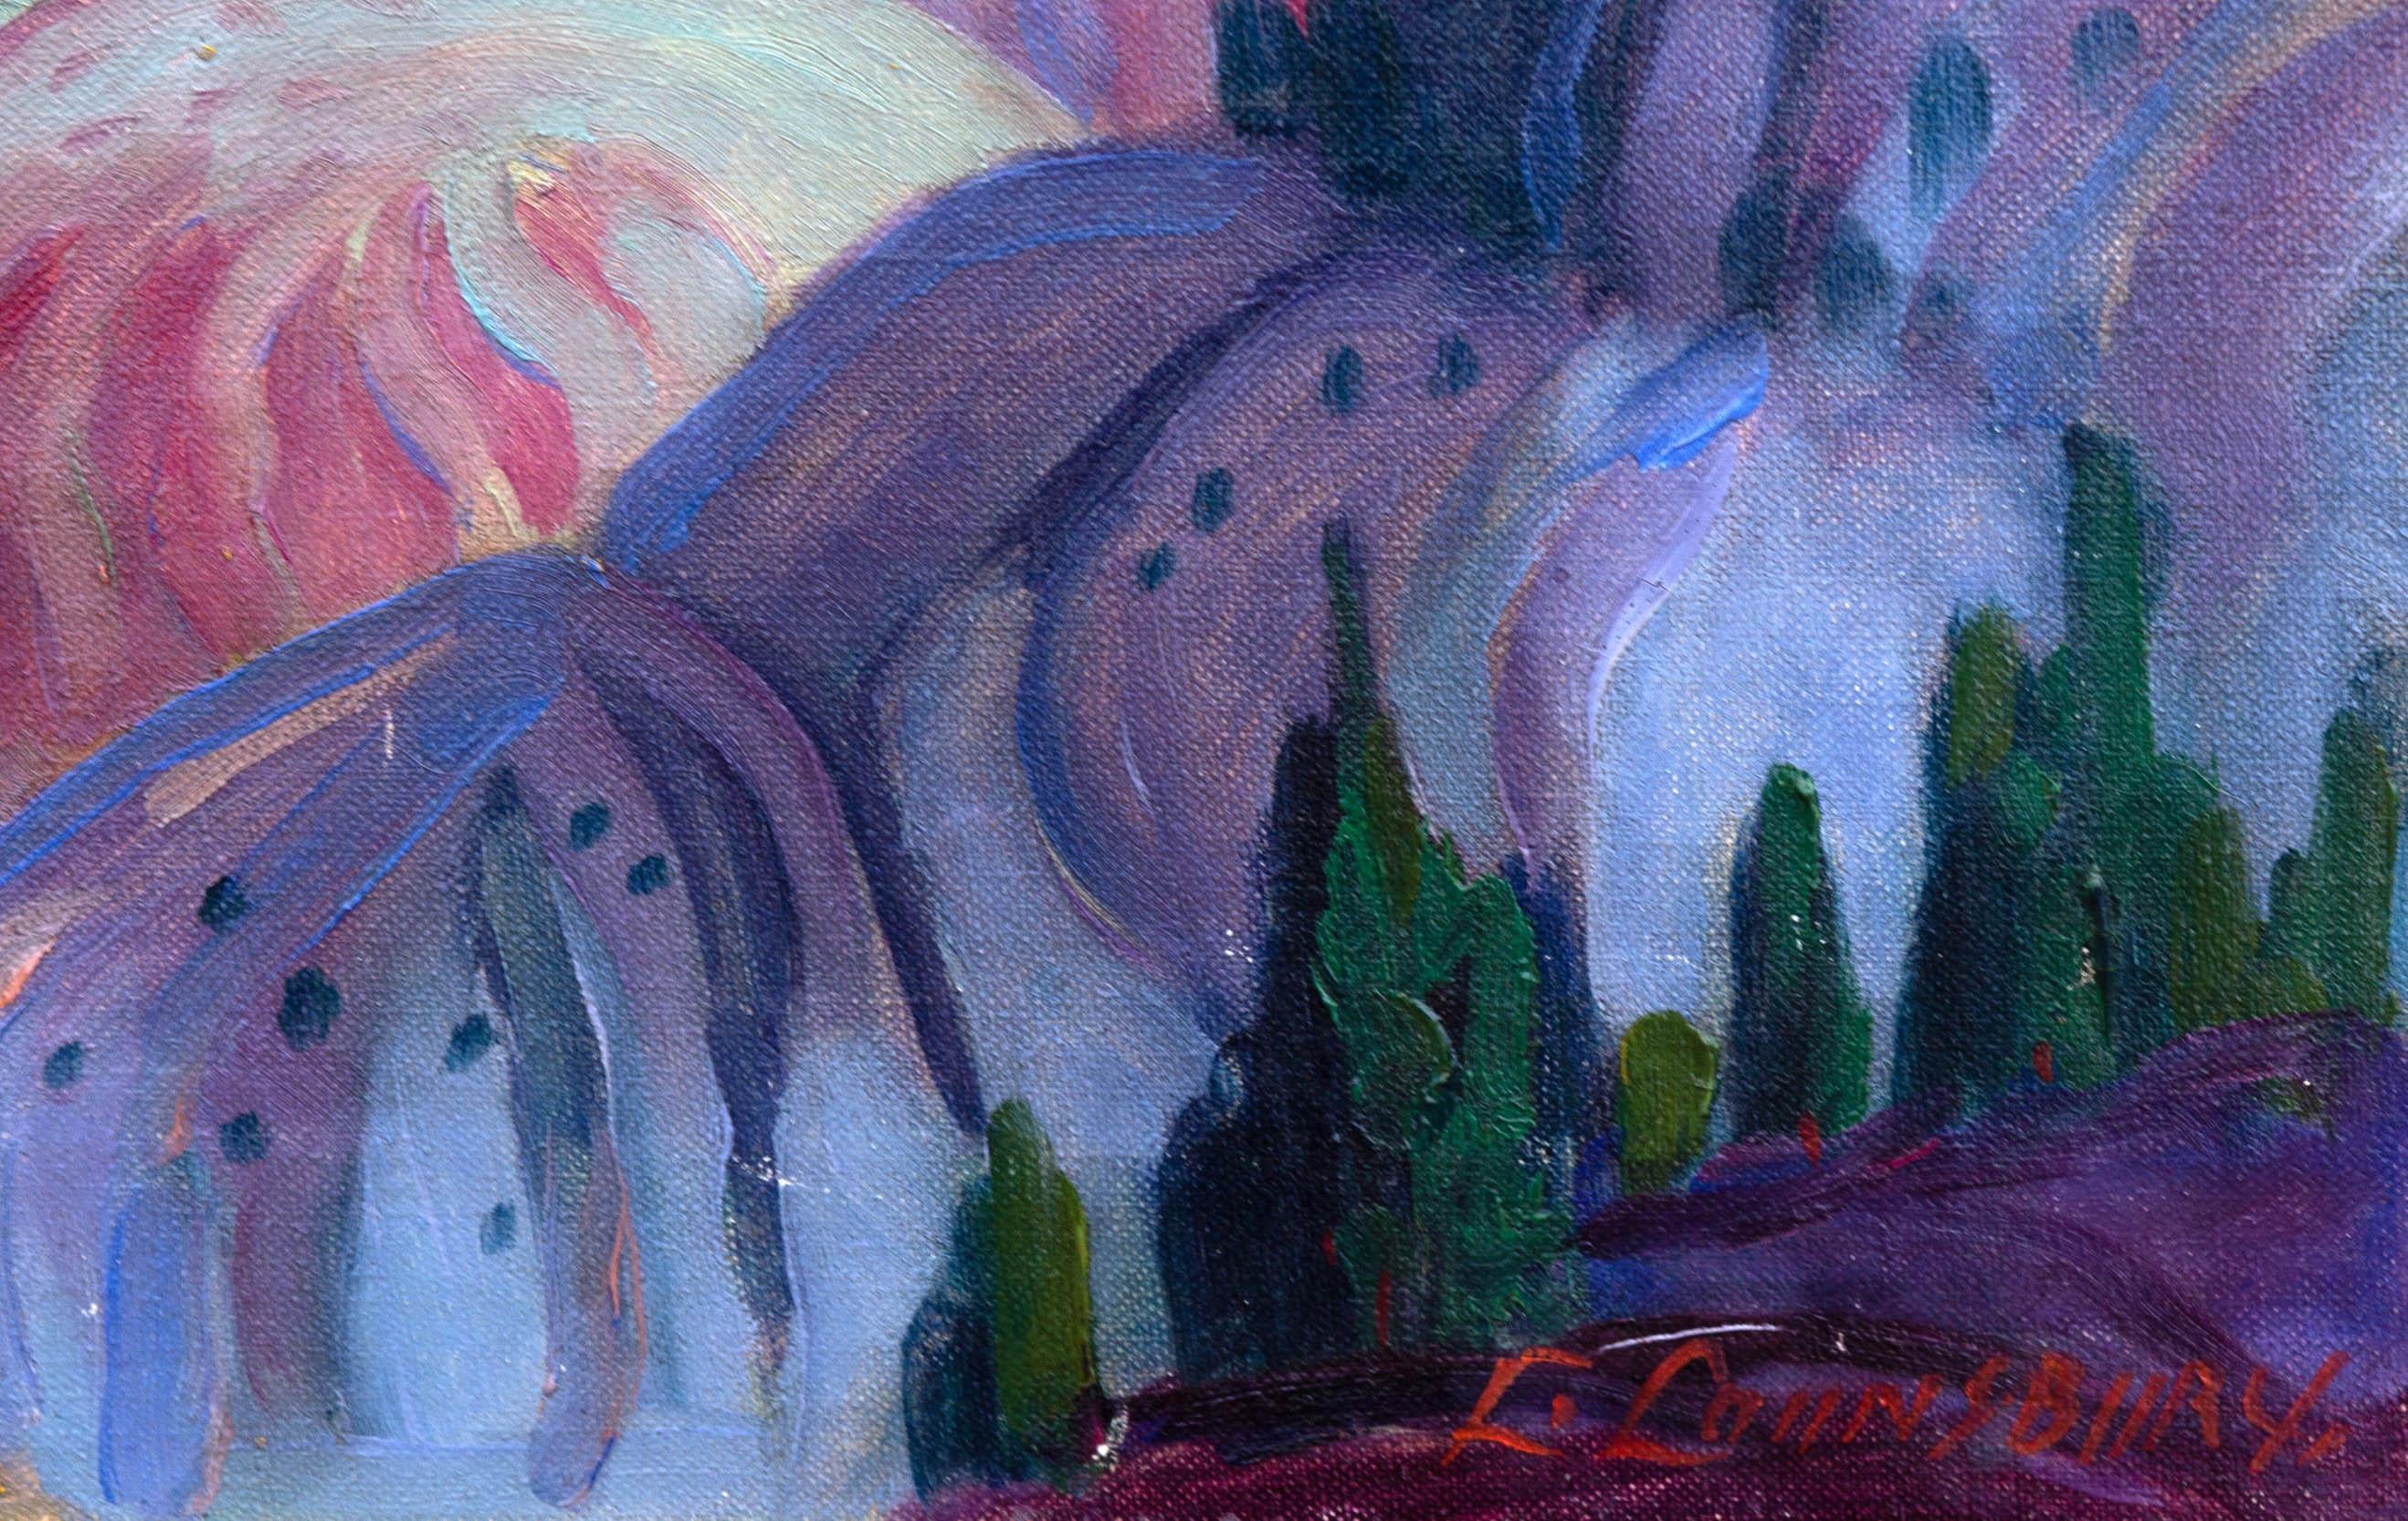 Grand Canyon modernist painting by Leslie Lounsbury. Oil on canvas, circa 1940s. Unframed.
Leslie Lounsbury was known for painting Barbados and the Western United States. His work is in the collection of the Barbados Museum.